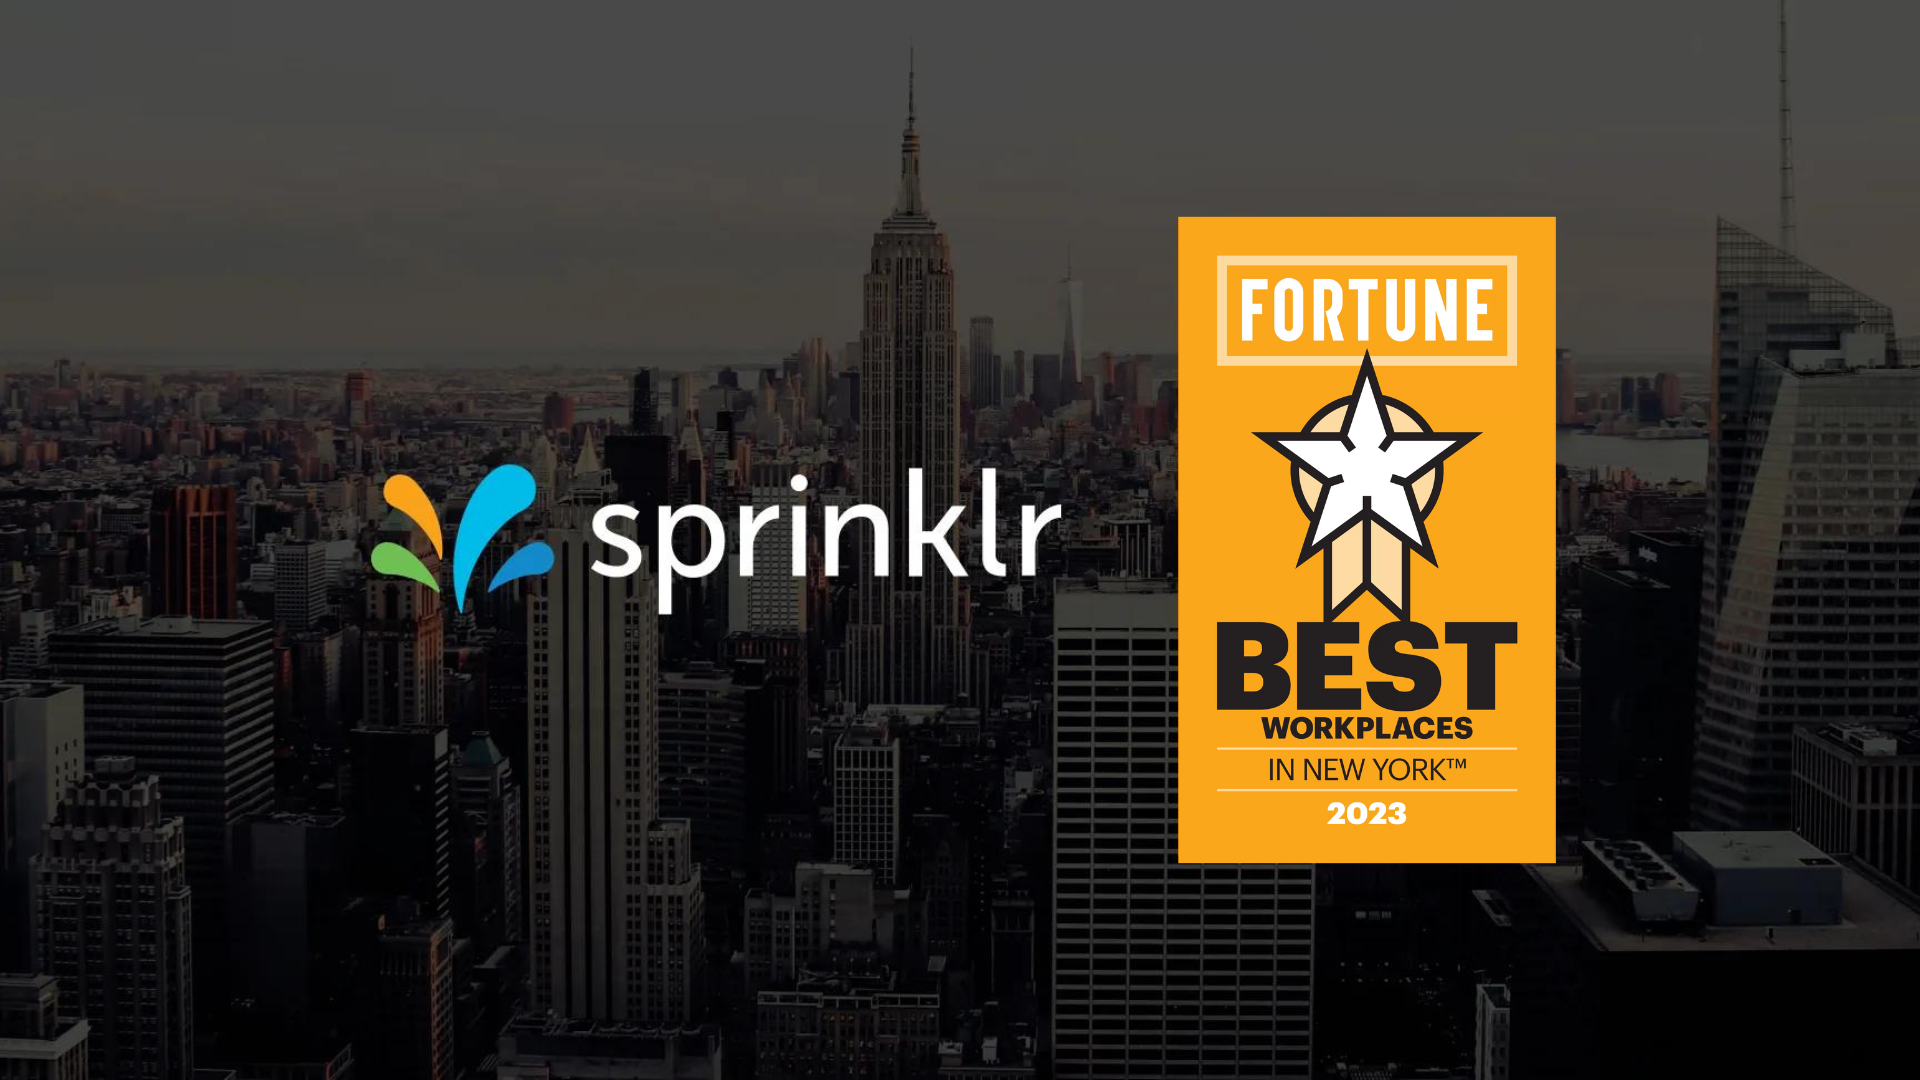 Sprinklr named to Fortune Magazine’s Best Workplaces in New York list for the third year in a row!